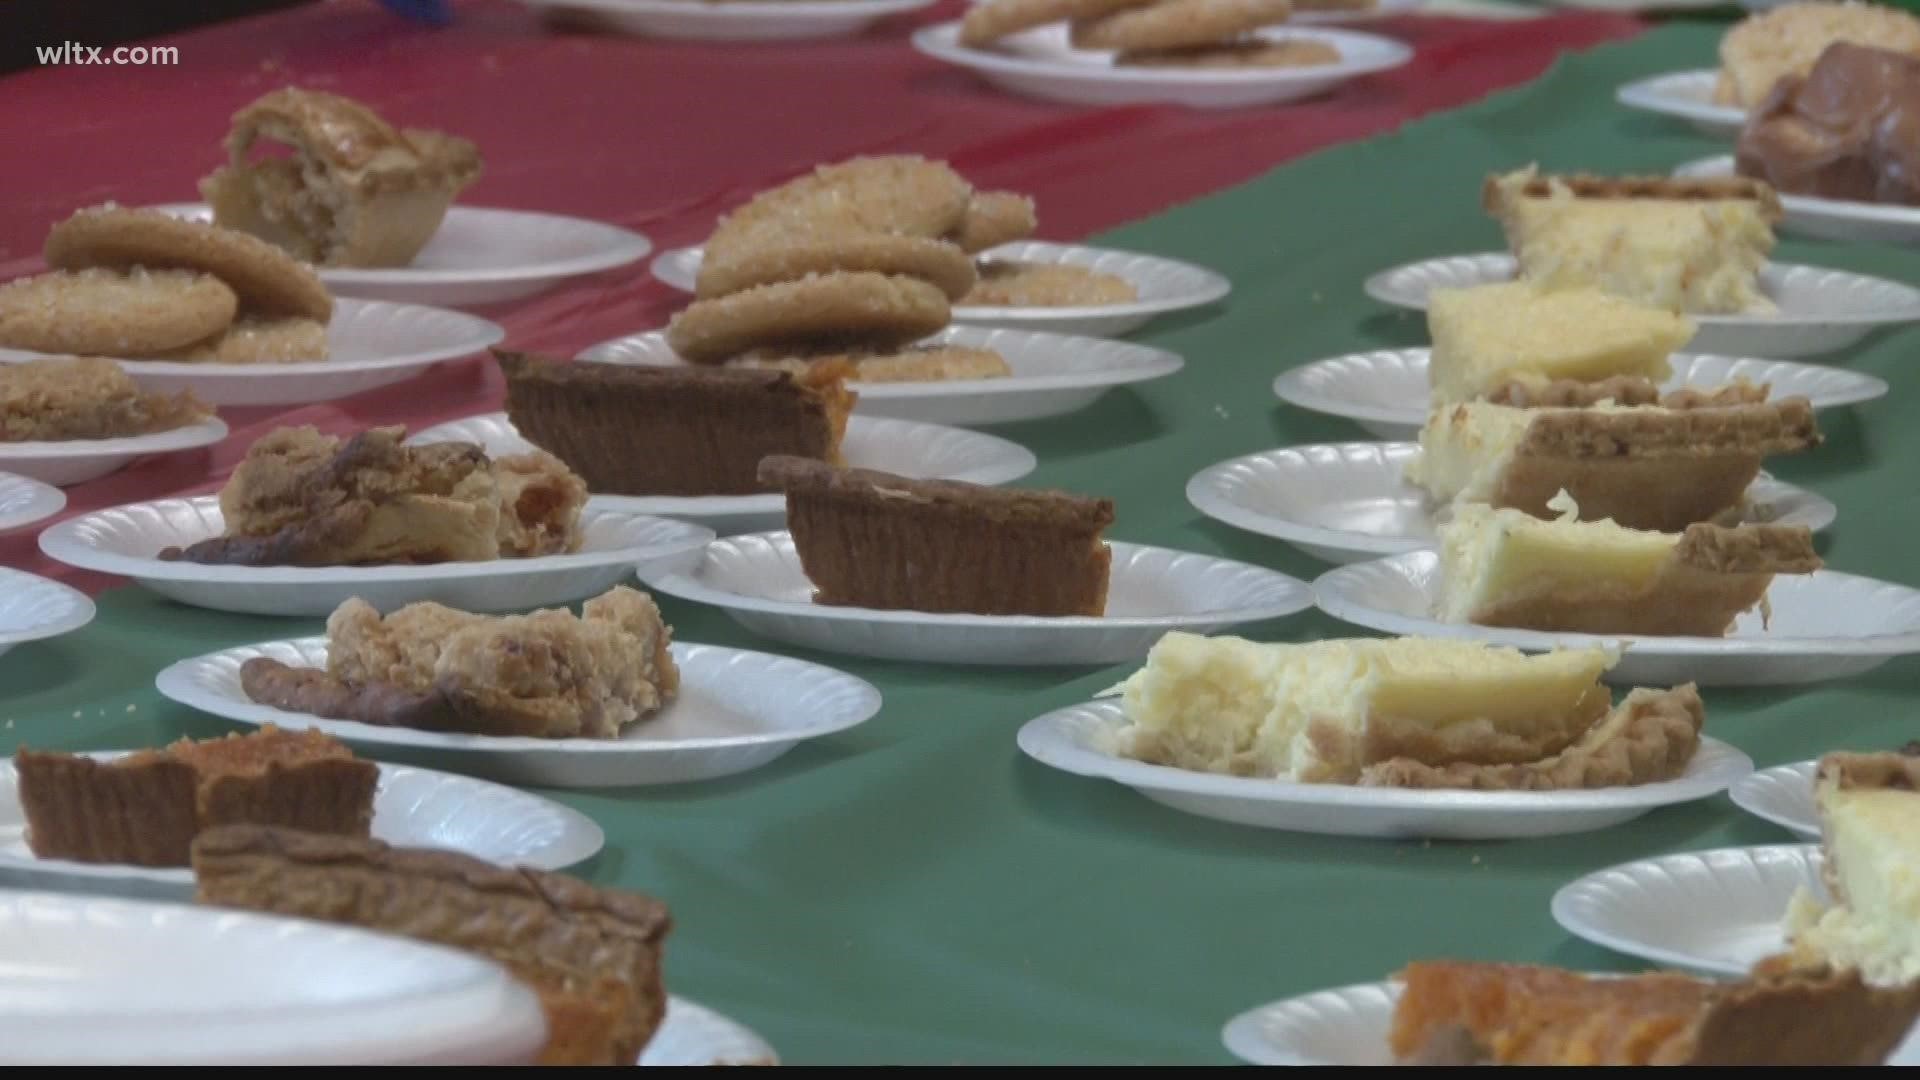 The interfaith dinner is the largest Thanksgiving dinner meal in the Midlands.